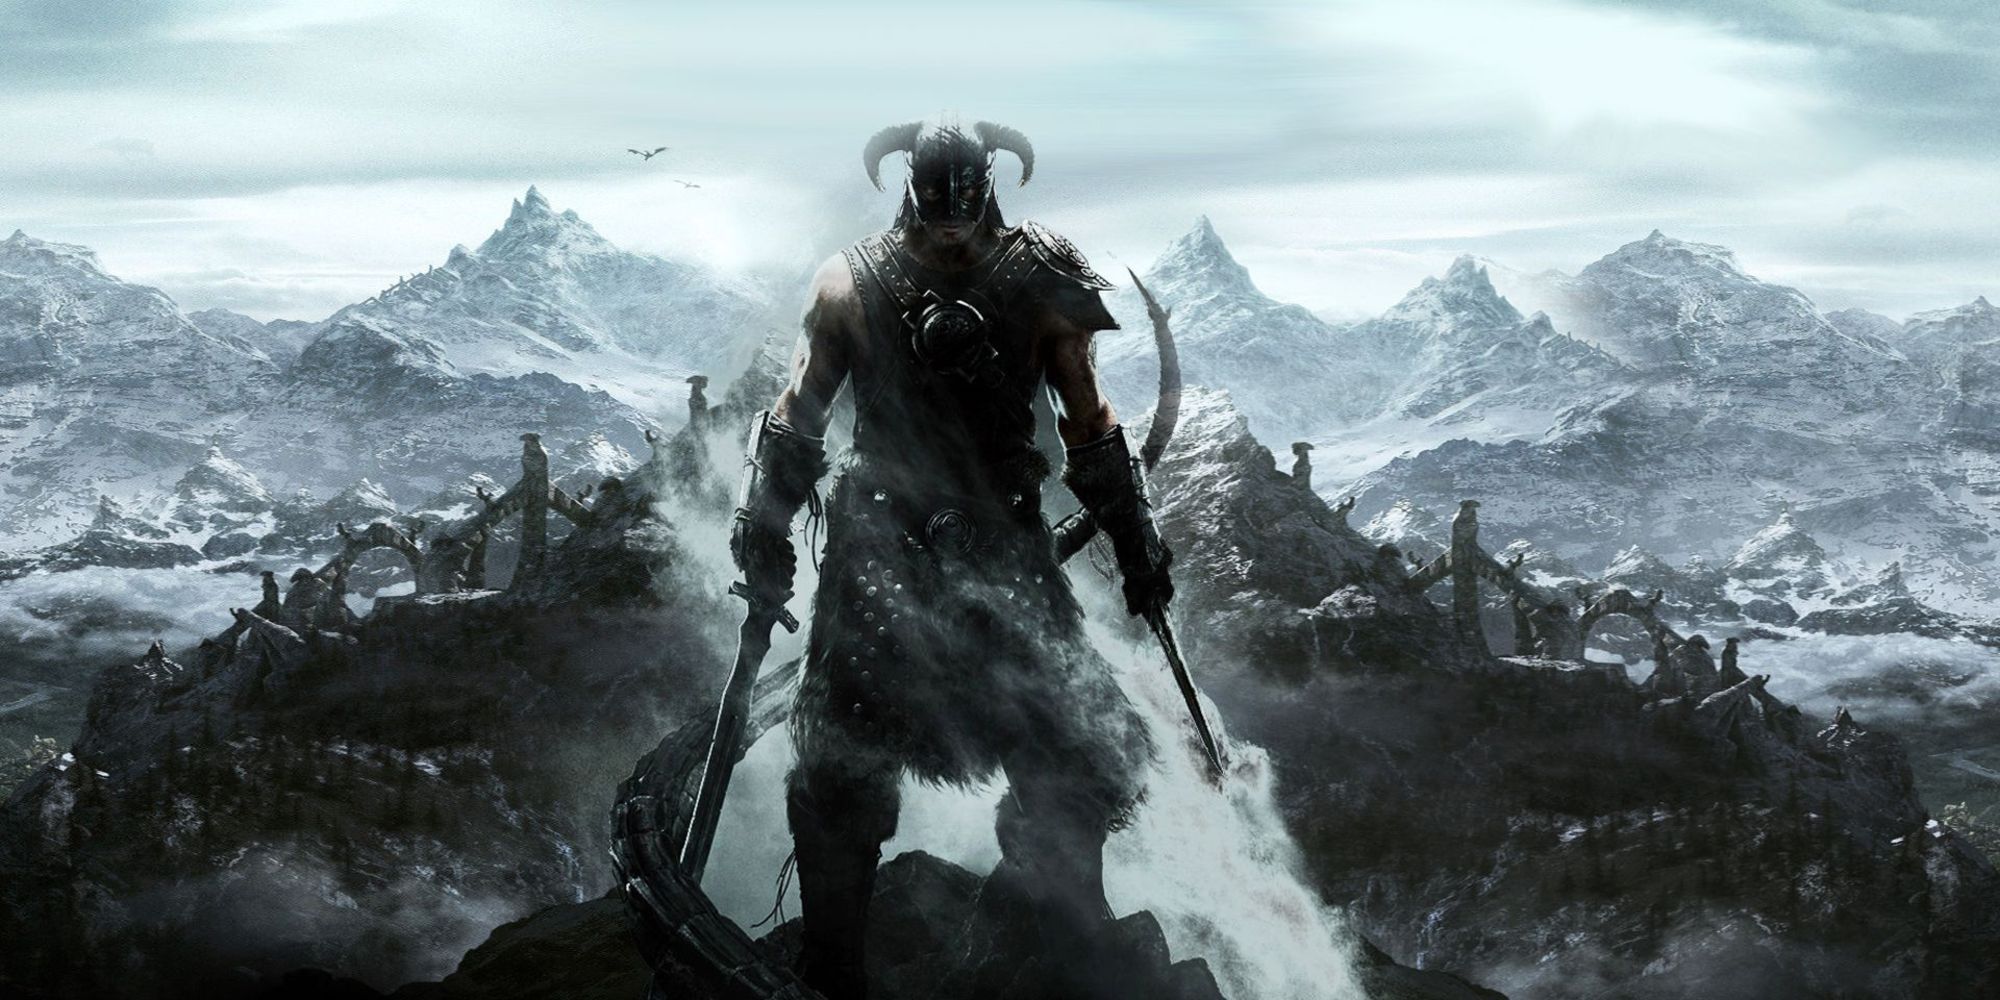 poster for The Elder Scrolls V Skyrim featuring the Dragonborn with mountains in the background